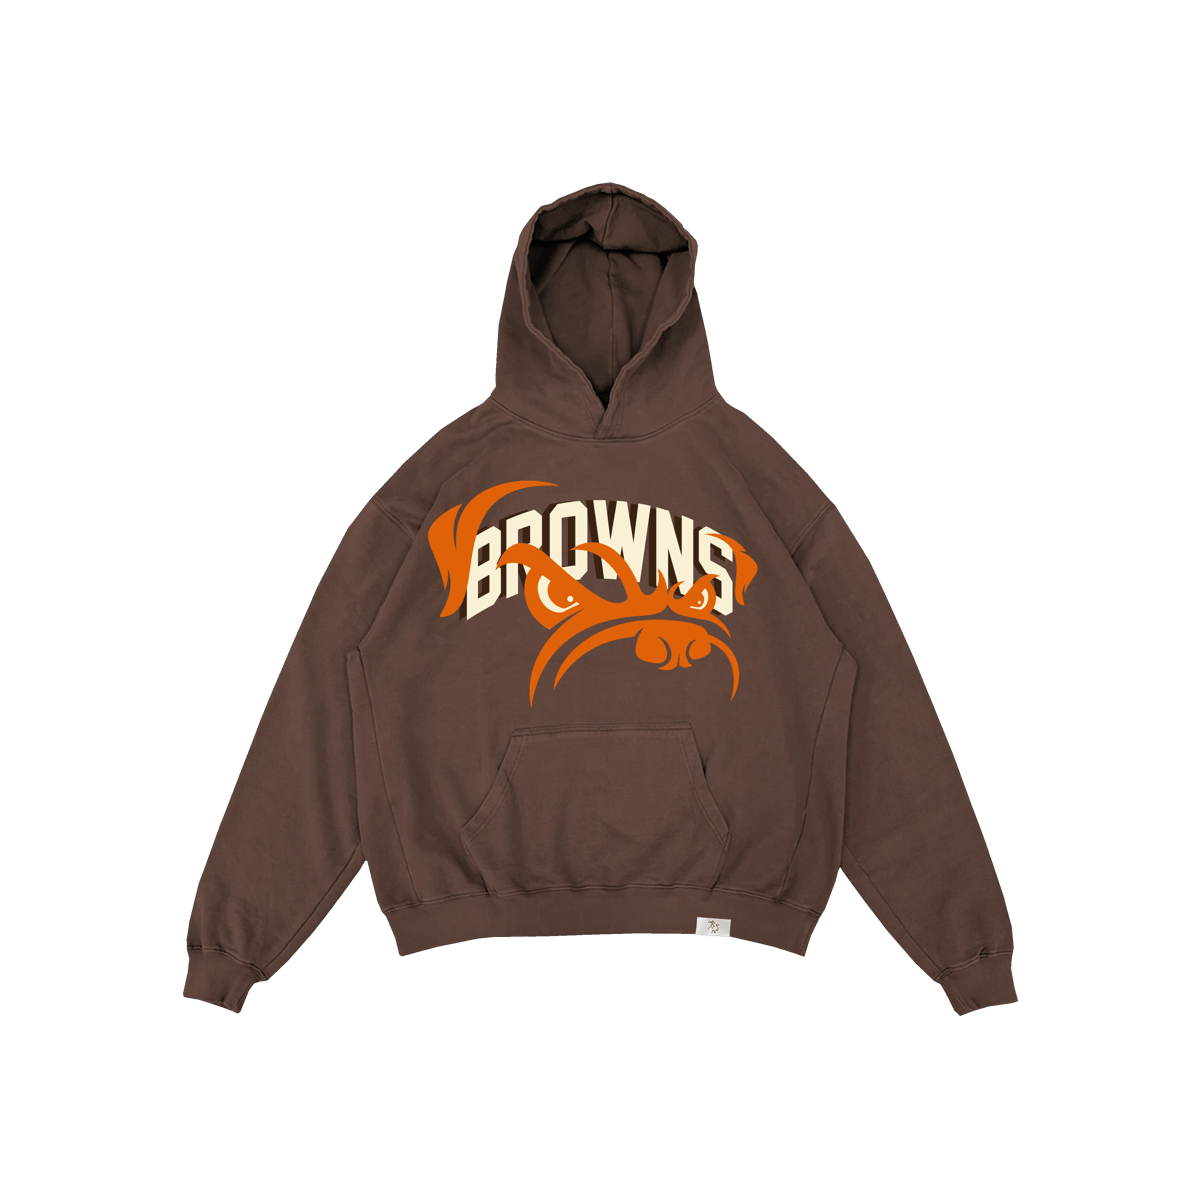 CLEVELAND BROWNS "DAWG" Hoodie